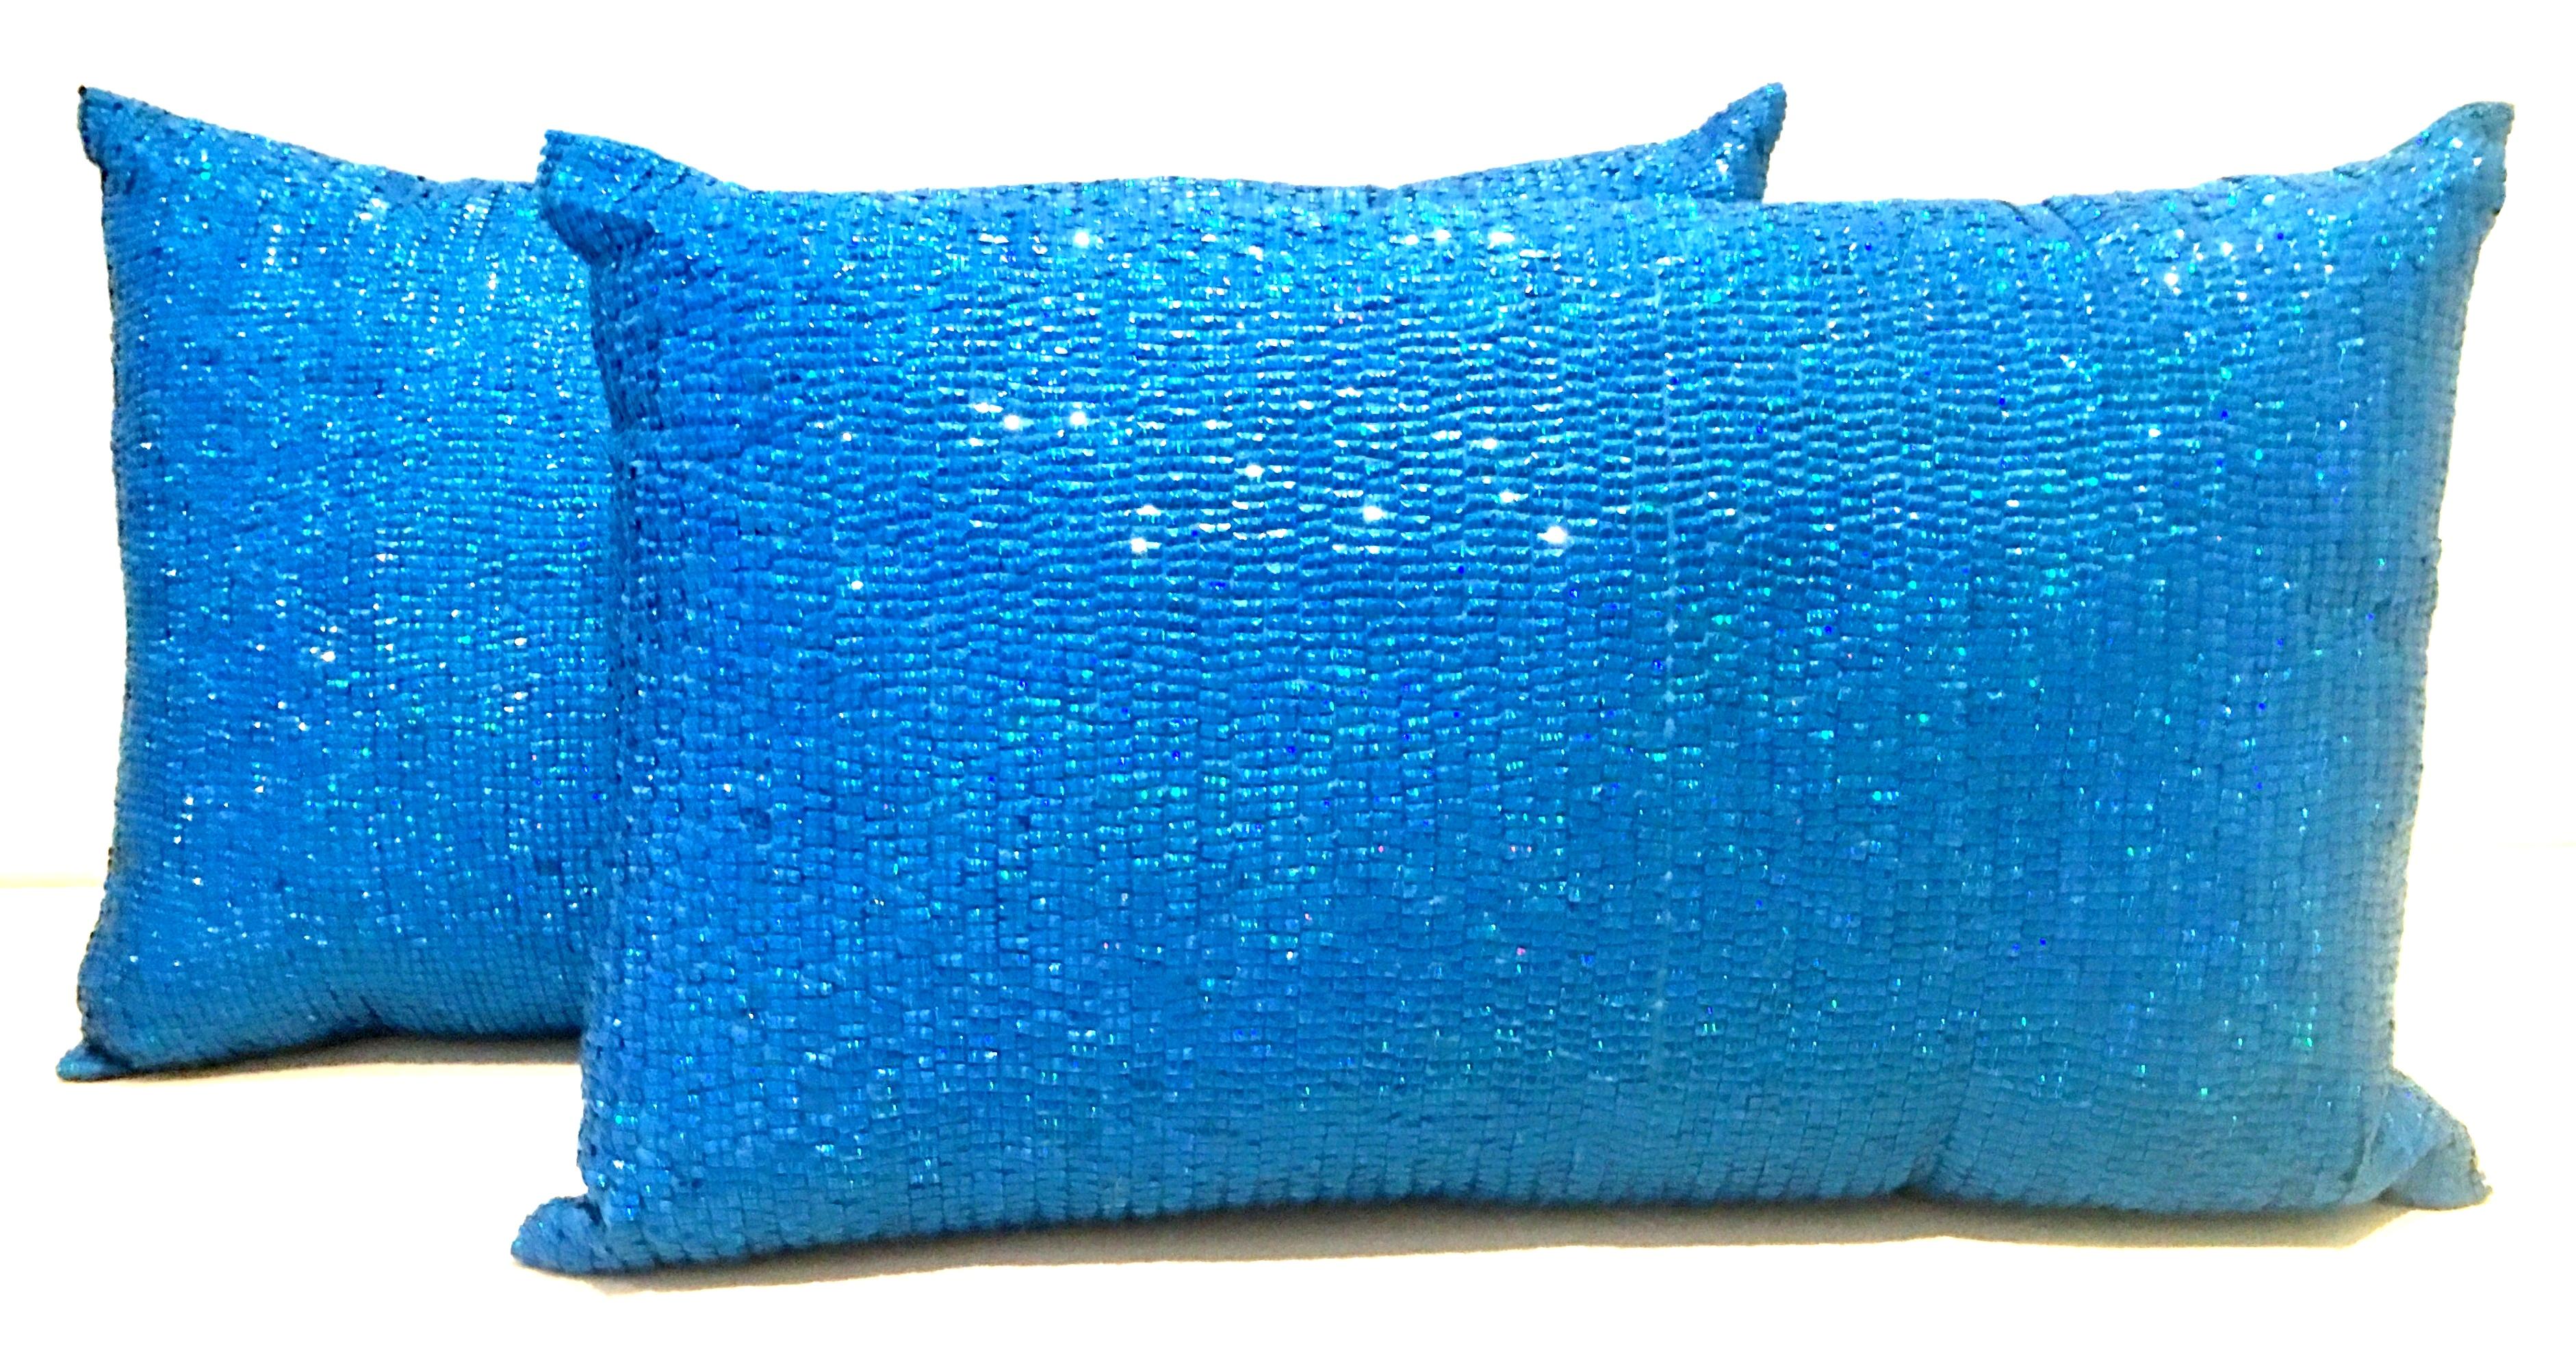 21st Century Pair of new electric blue Austrian crystal and silk down fill pillows. These lovely rectangular pillows include cotton down filled inserts, hidden zipper on the back side for easy removal. Dry clean only.
New, used for display only.